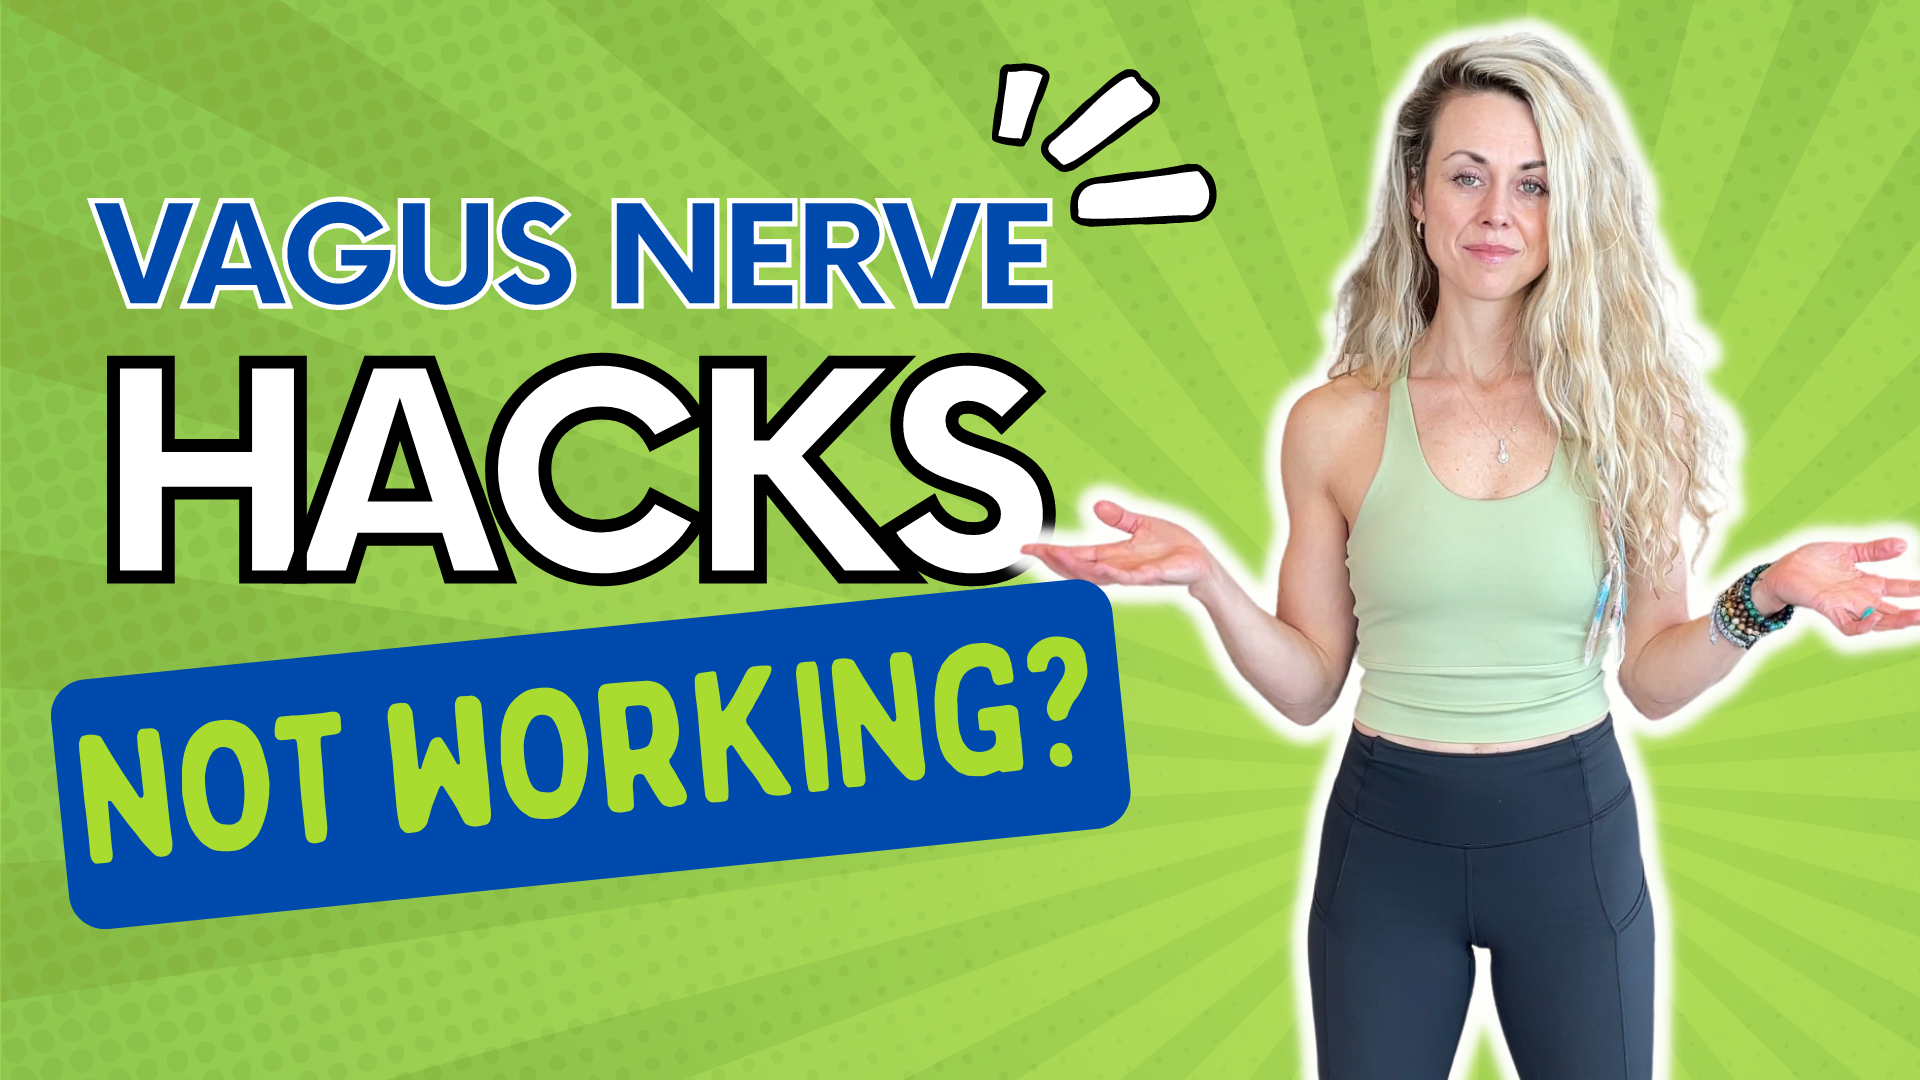 What if vagus nerve hacks aren’t working